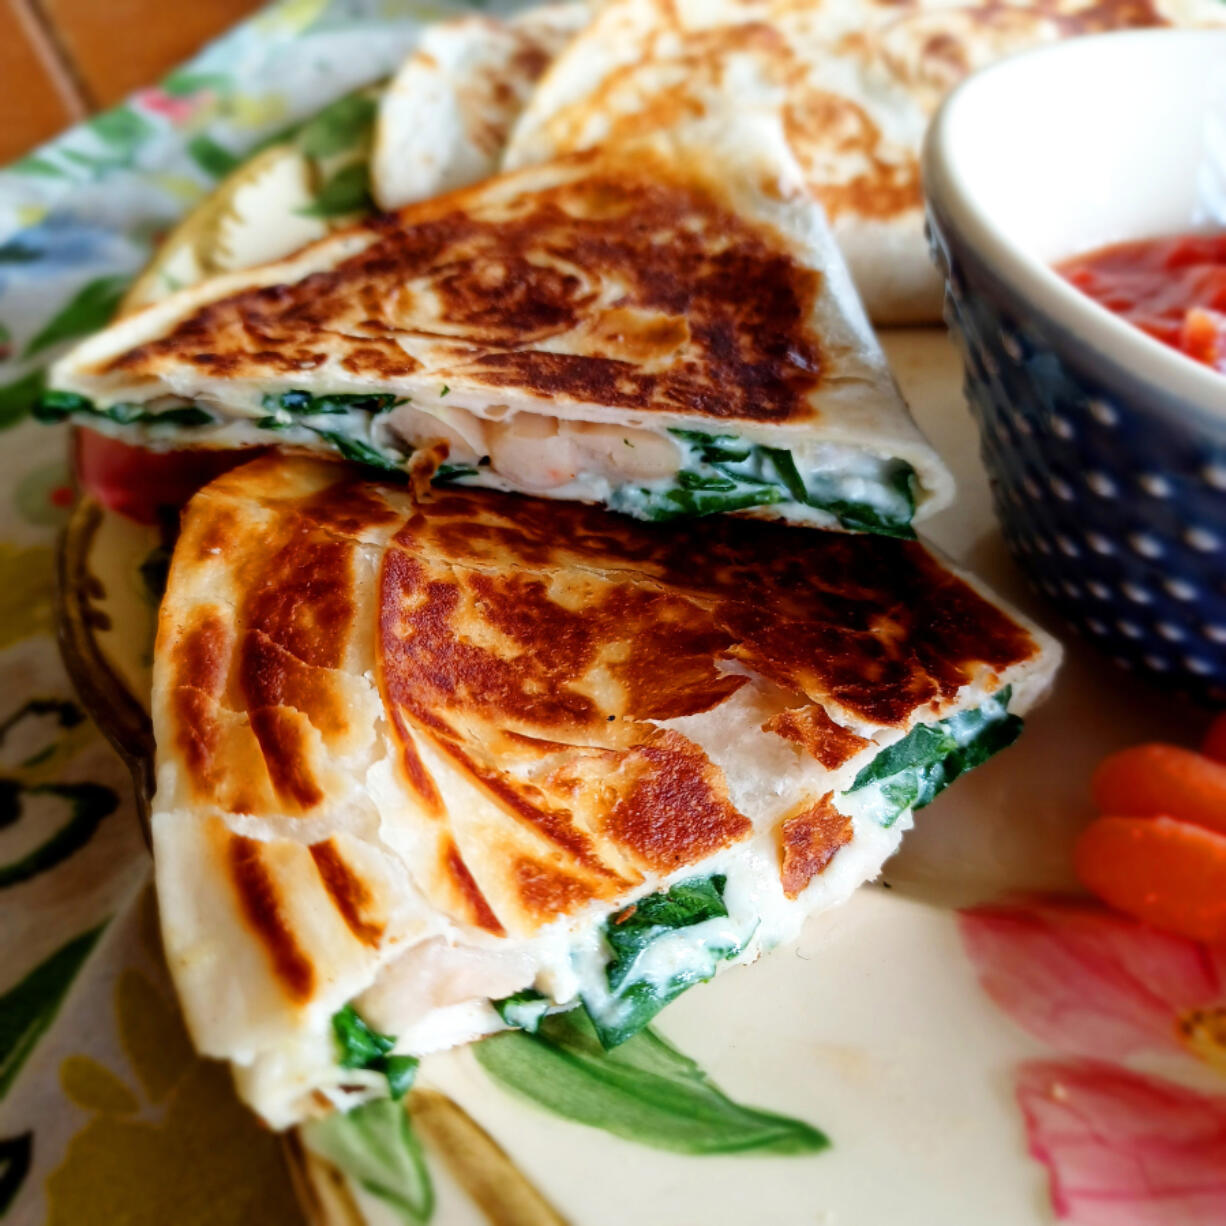 Make your quesadillas fancy-shmancy with white beans, spinach and queso fresco.